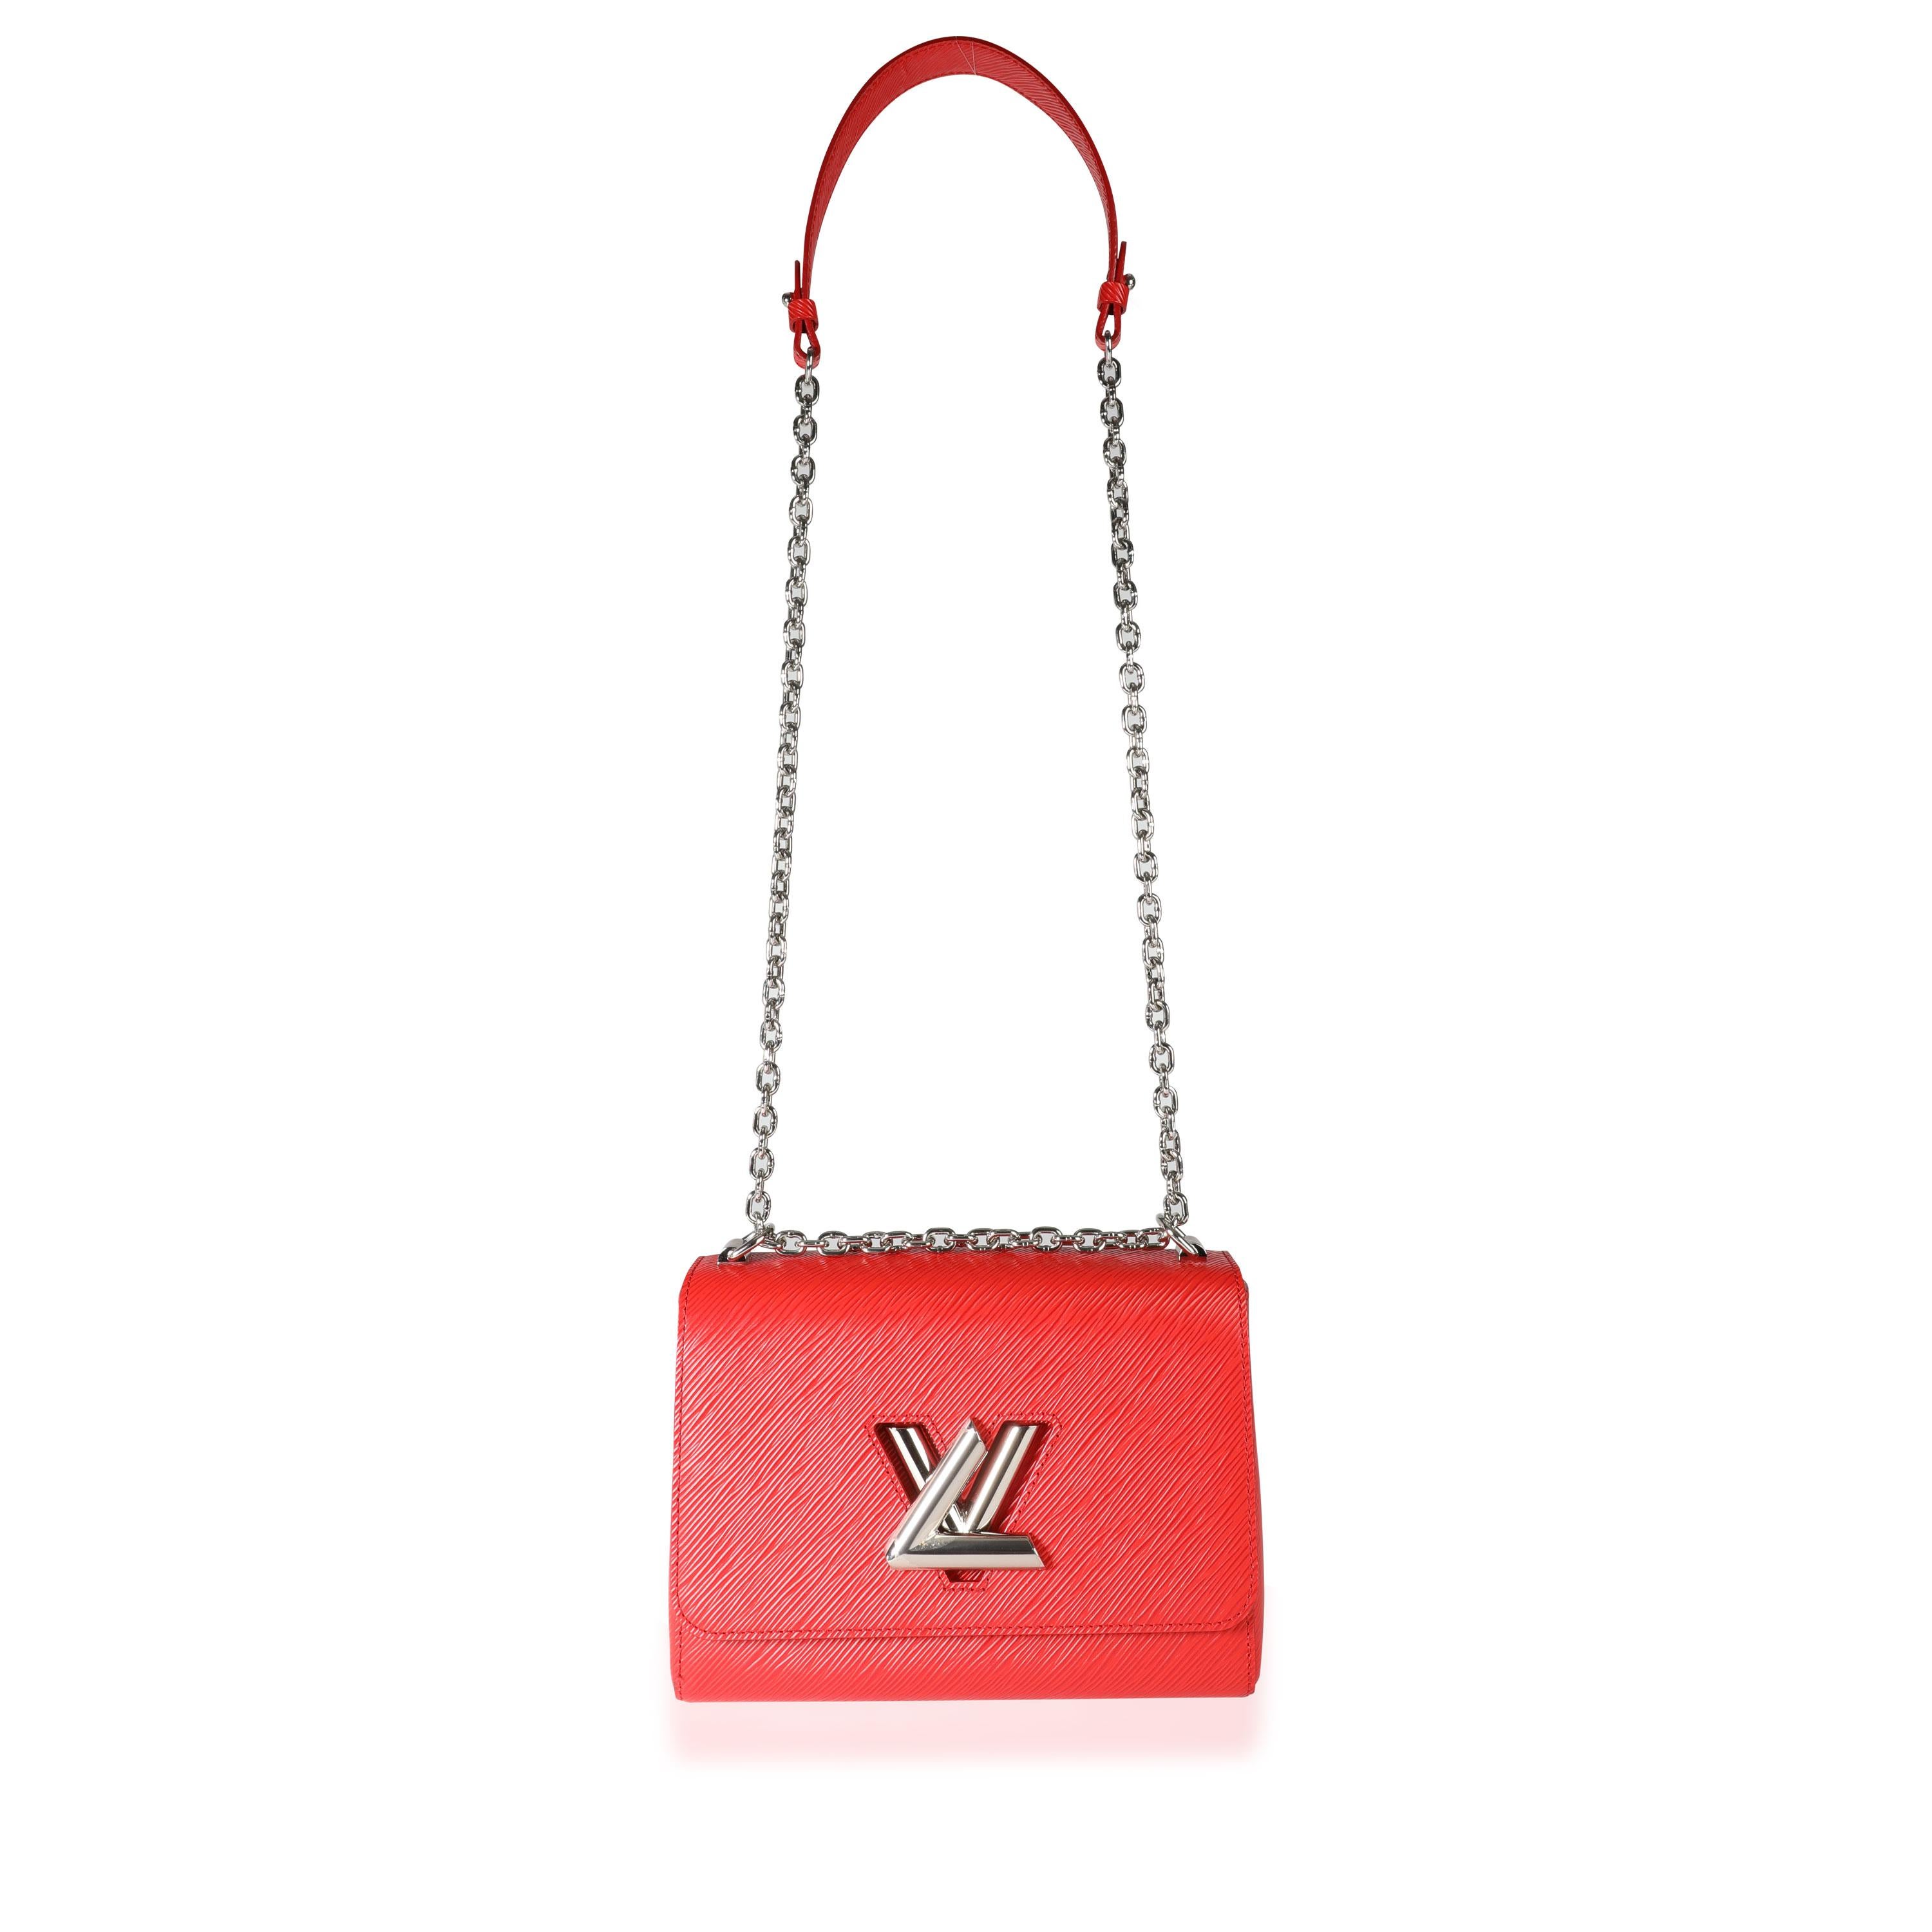 
Louis Vuitton Coquelicot Epi Leather Twist Chain MM
SKU: 113519
MSRP: USD 4,150.00
Condition: Pre-owned (3000)
Condition Description: The Louis Vuitton Twist Bag was first created for the 2015 Cruise show collection. Coming in a coqeulicot red Epi